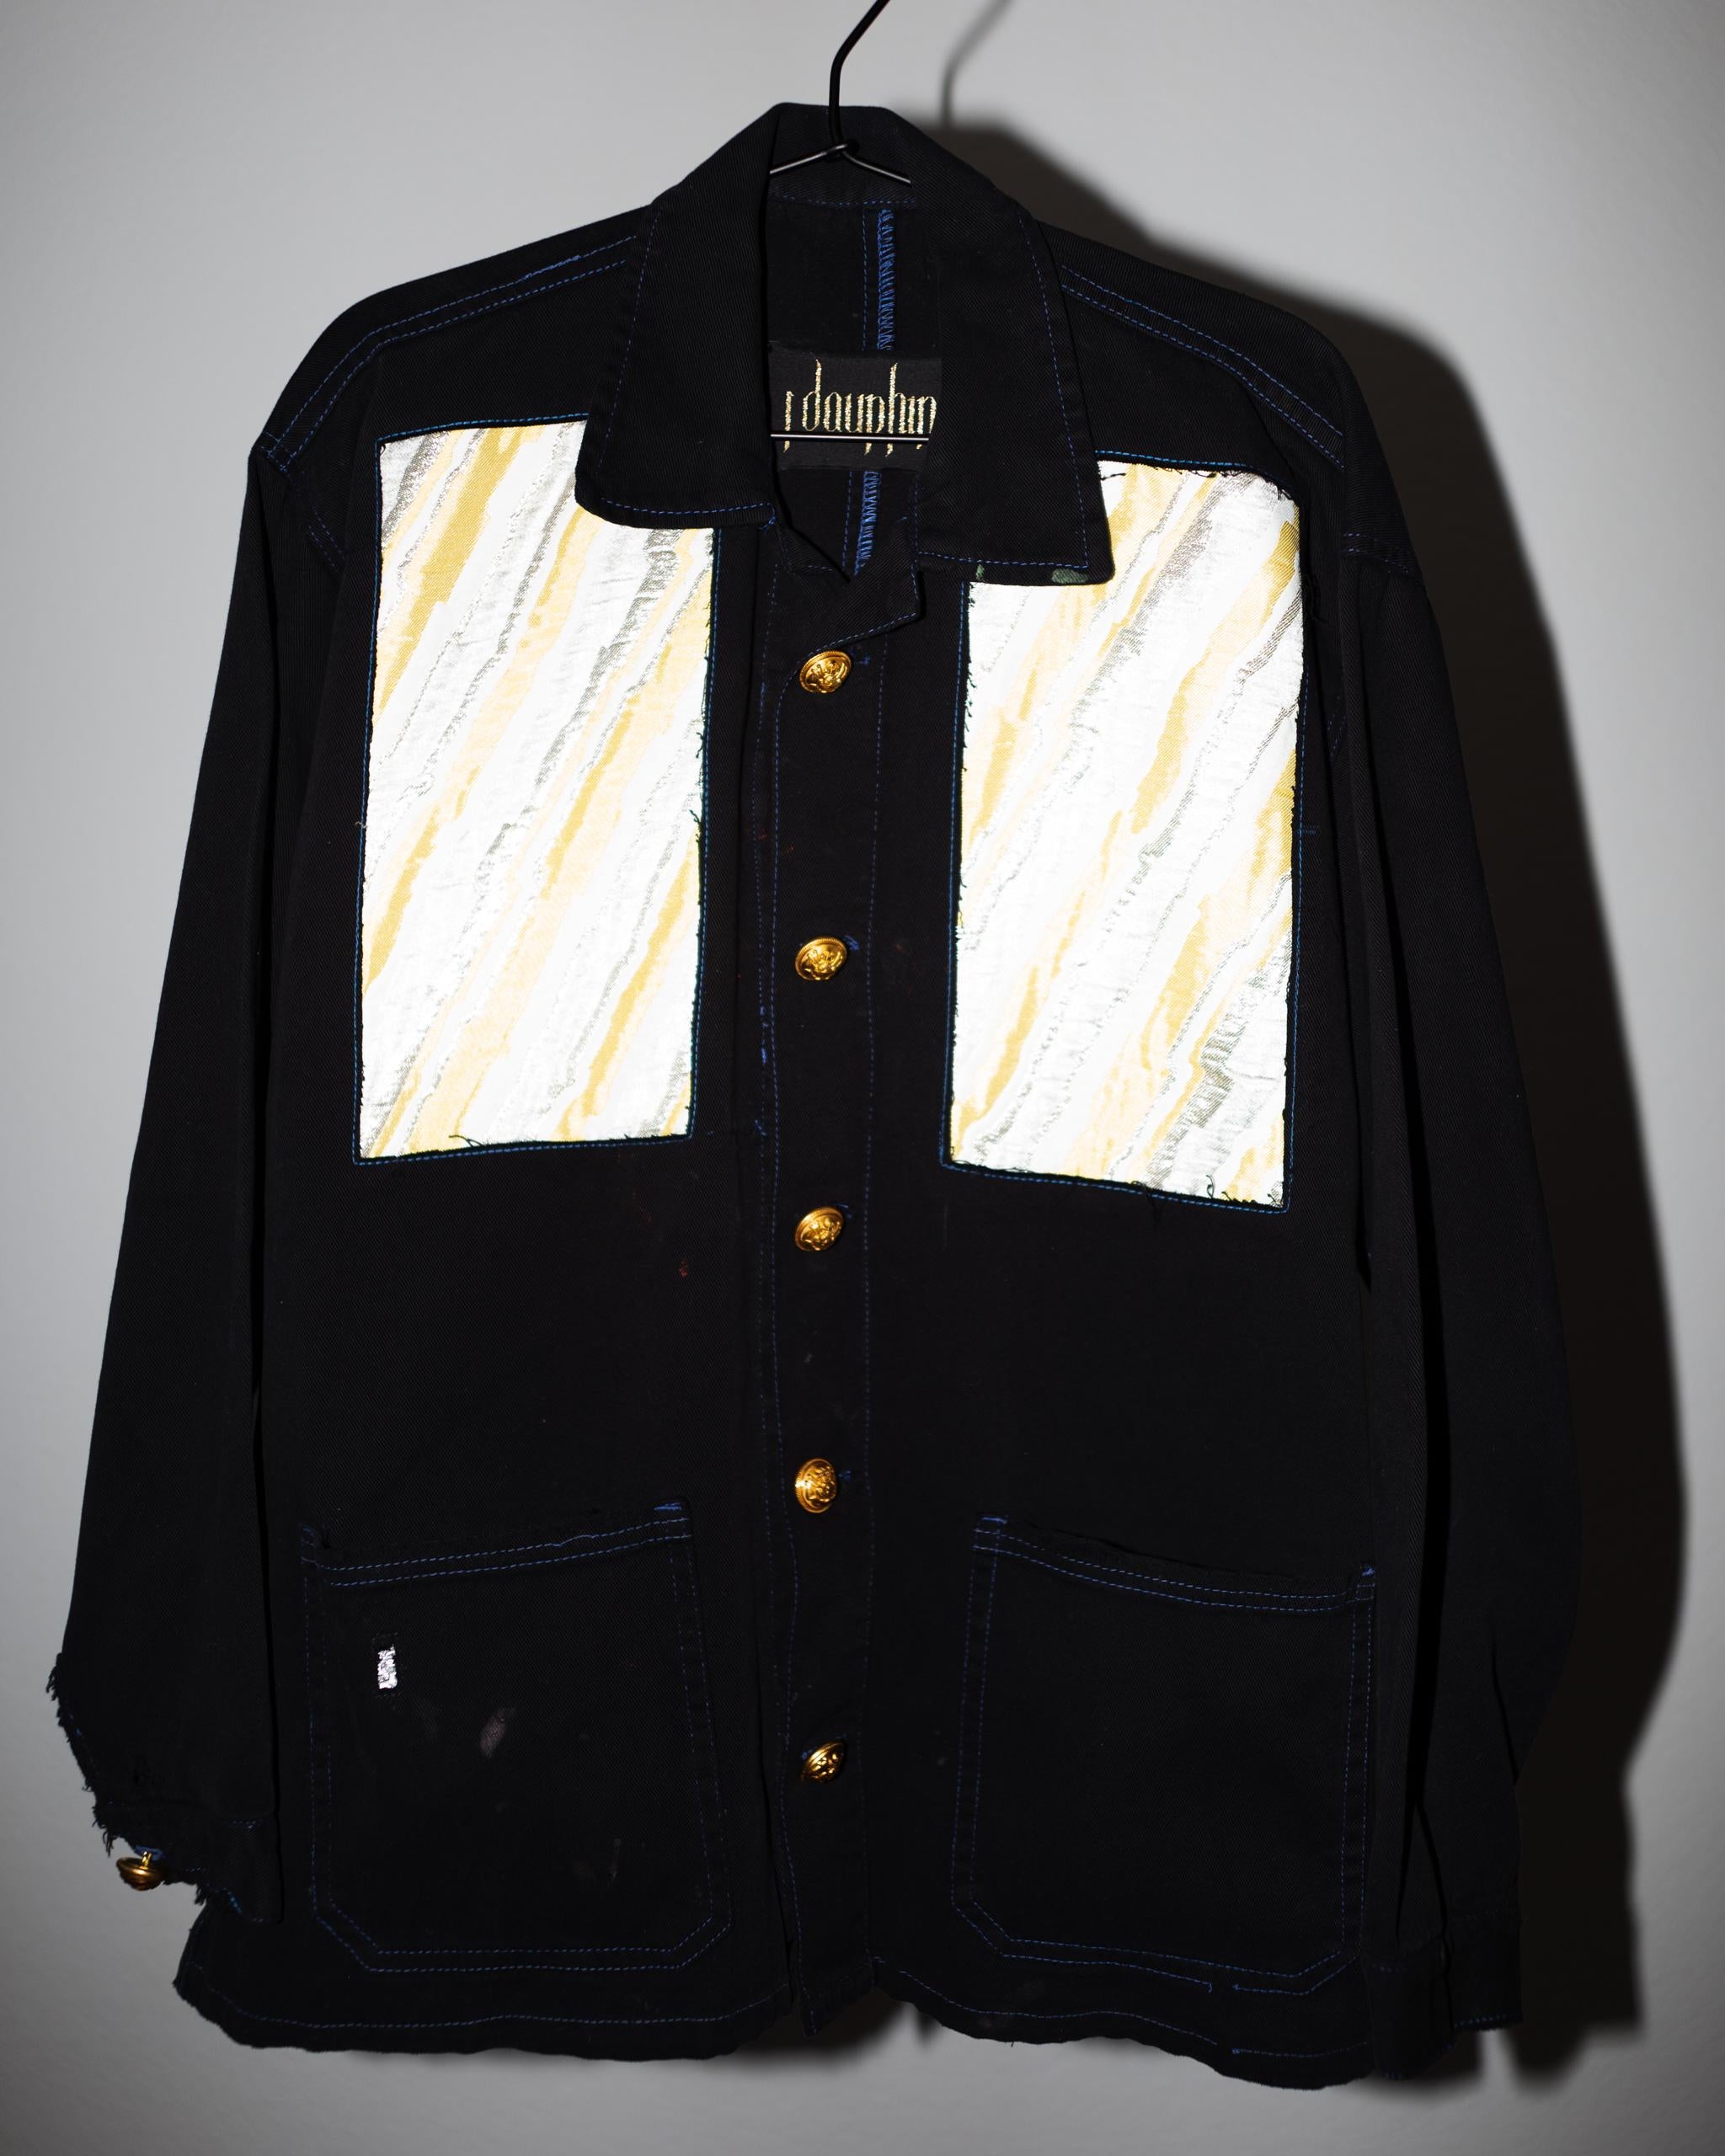 Vintage one of a kind Pastel Silver Lurex White Yellow Brocade Patches, Black Remade Work Wear Vintage Jacket, Vintage Gold plated Brass Buttons from Paris around the 40